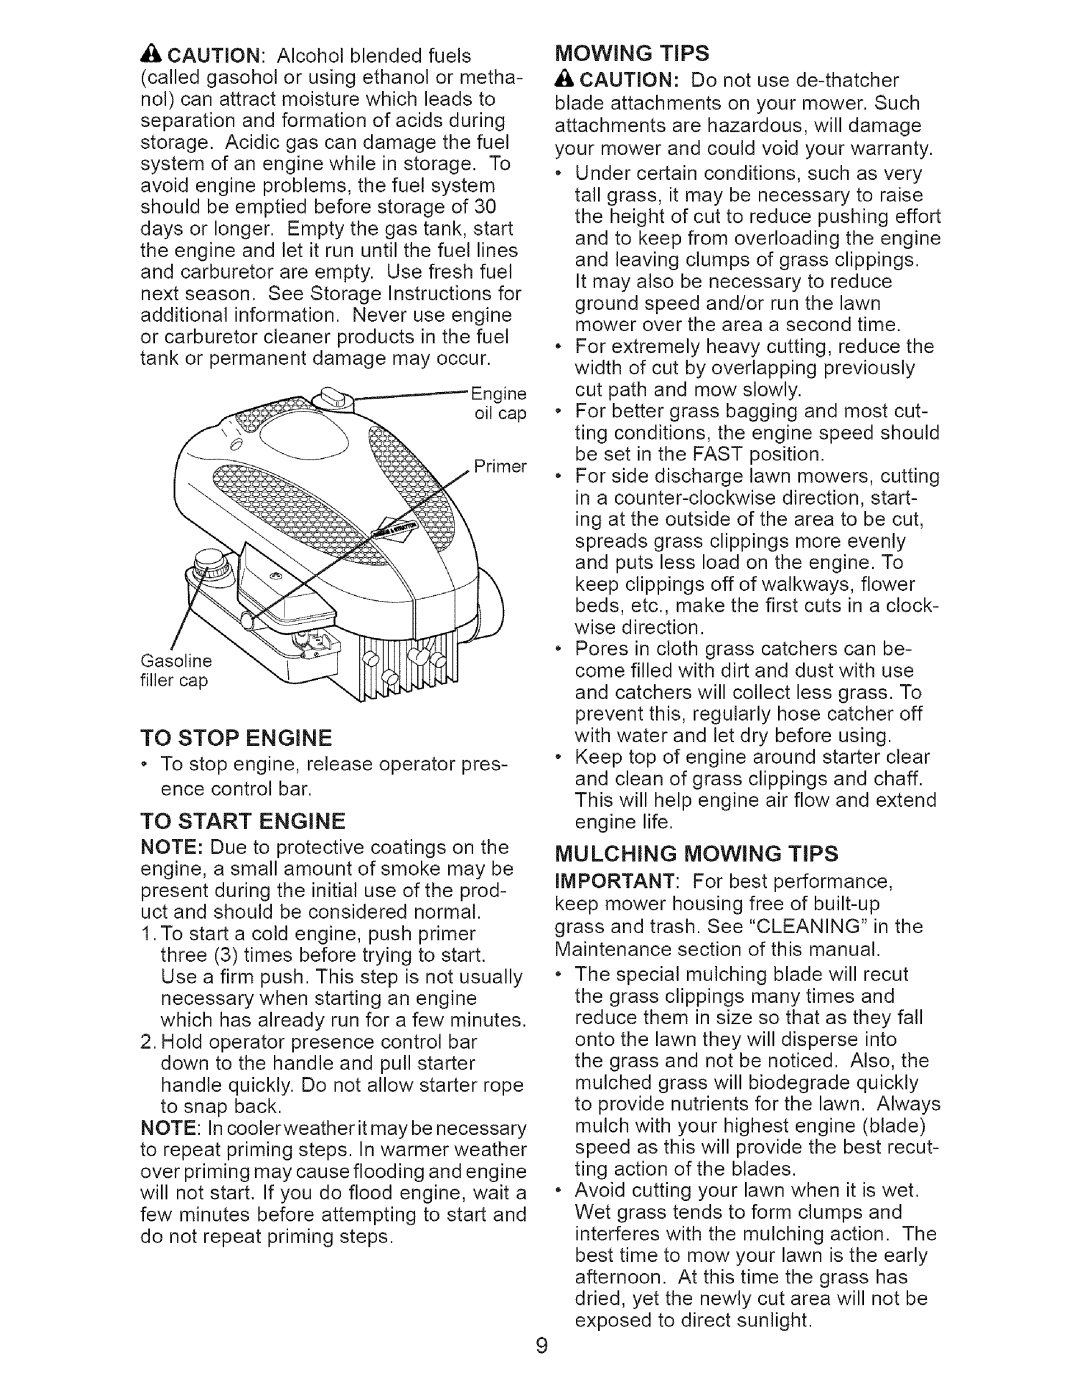 Craftsman 38514 owner manual A CAUTION: Alcohol blendedfuels, MULCHING MOWING TiPS, Mowing 